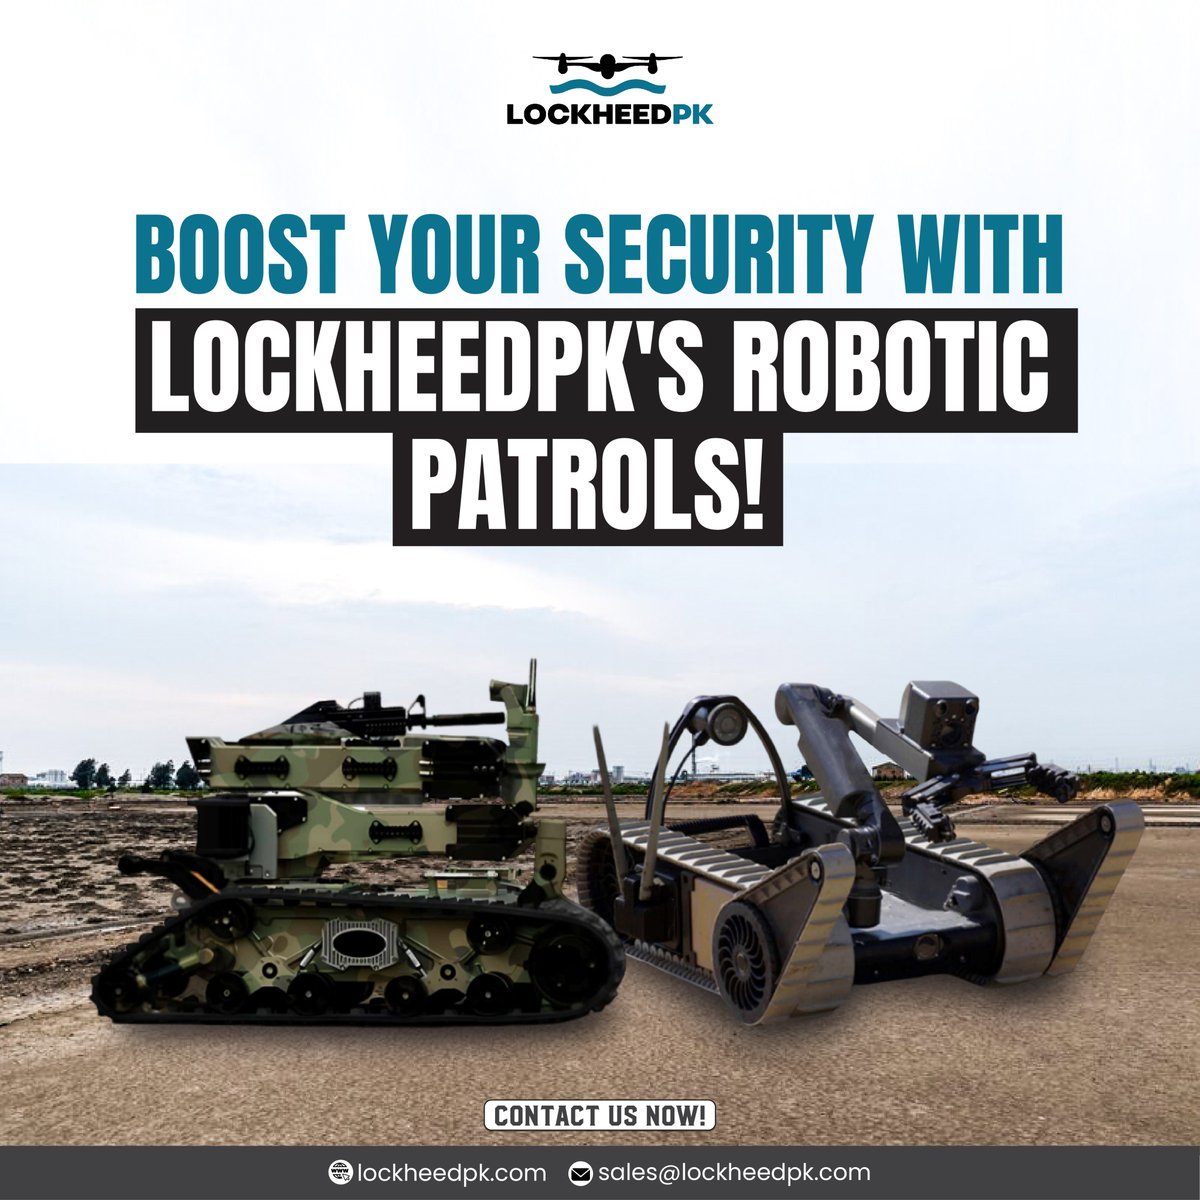 Stay ahead of the curve with LockheedPK's advanced robotic patrols! 🤖 Experience the future of security with our state-of-the-art automated patrol units

#AdvancedRobotics #SecuritySolutions #TechInnovation
#RoboticSecurity #AutomatedPatrol #FutureOfSafety
#TechTrends